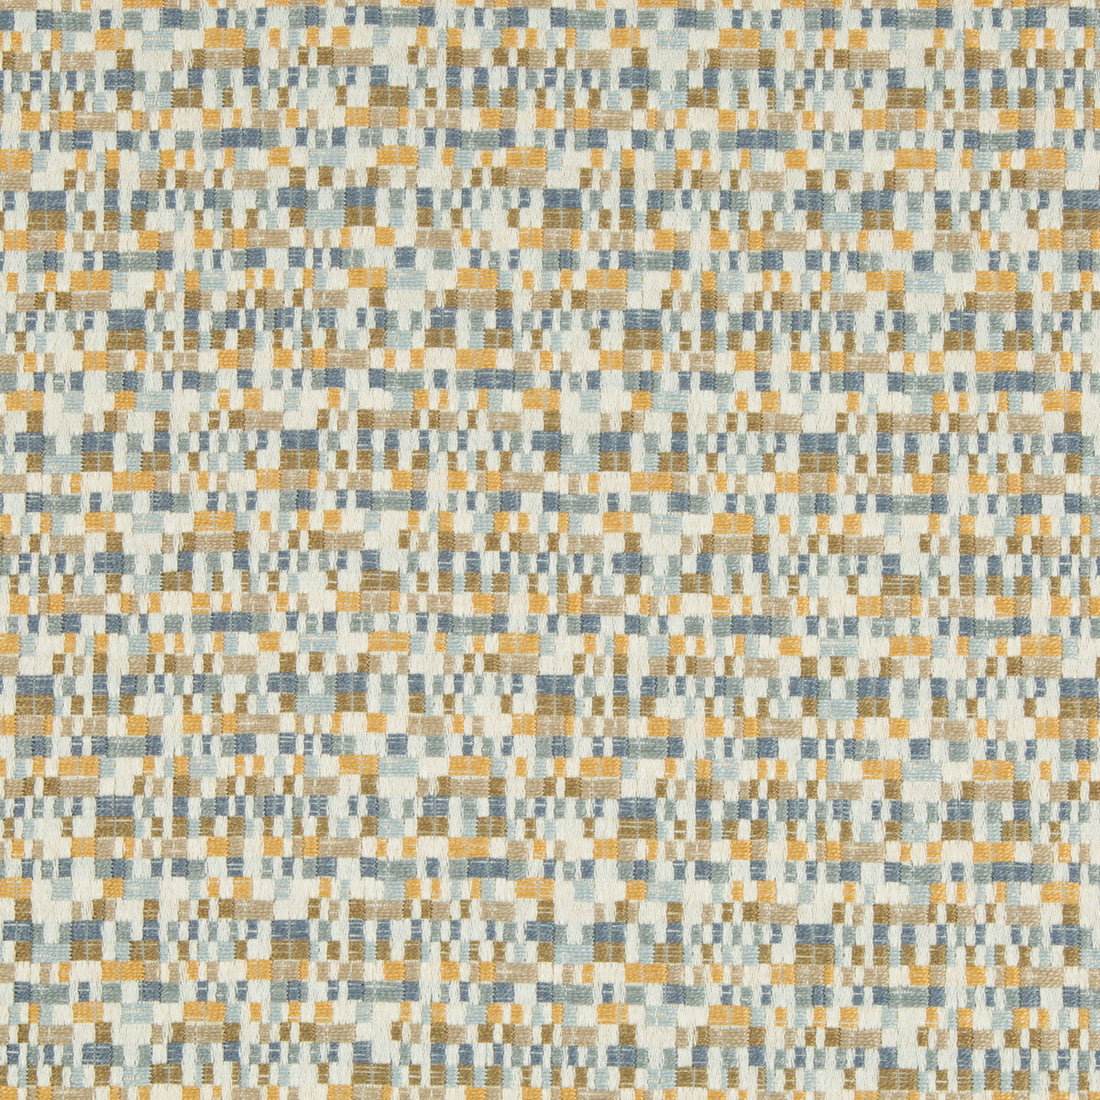 Kravet Contract fabric in 34736-411 color - pattern 34736.411.0 - by Kravet Contract in the Crypton Incase collection